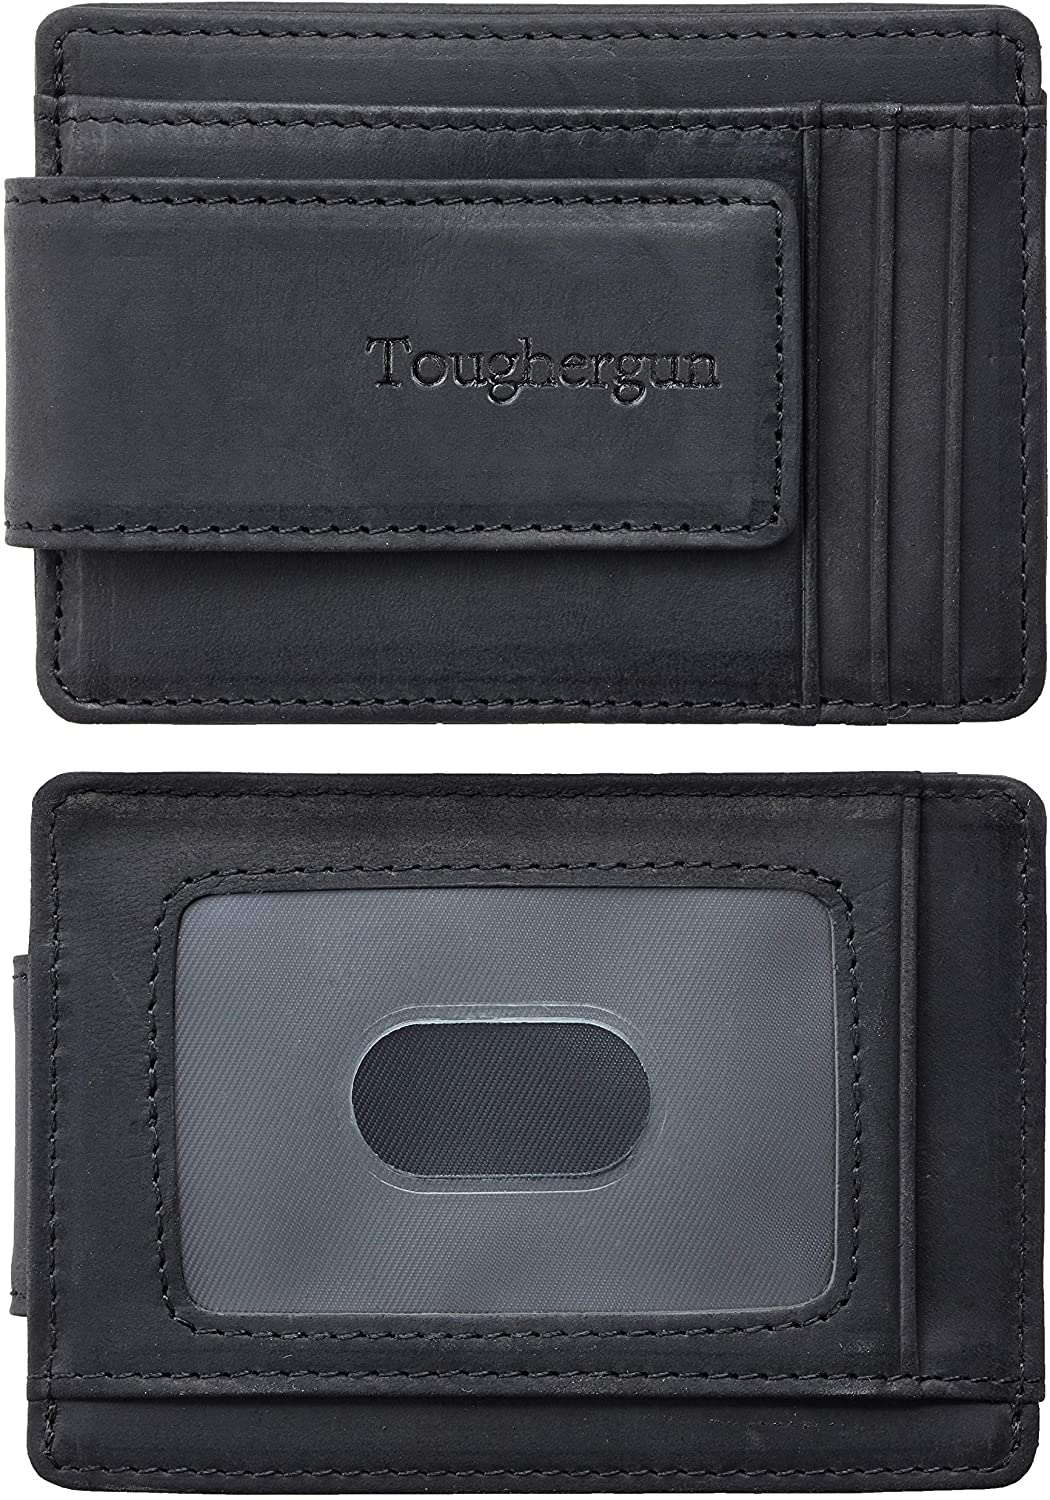 Strong Magnets! - Black Leather New Magnetic Money Clip